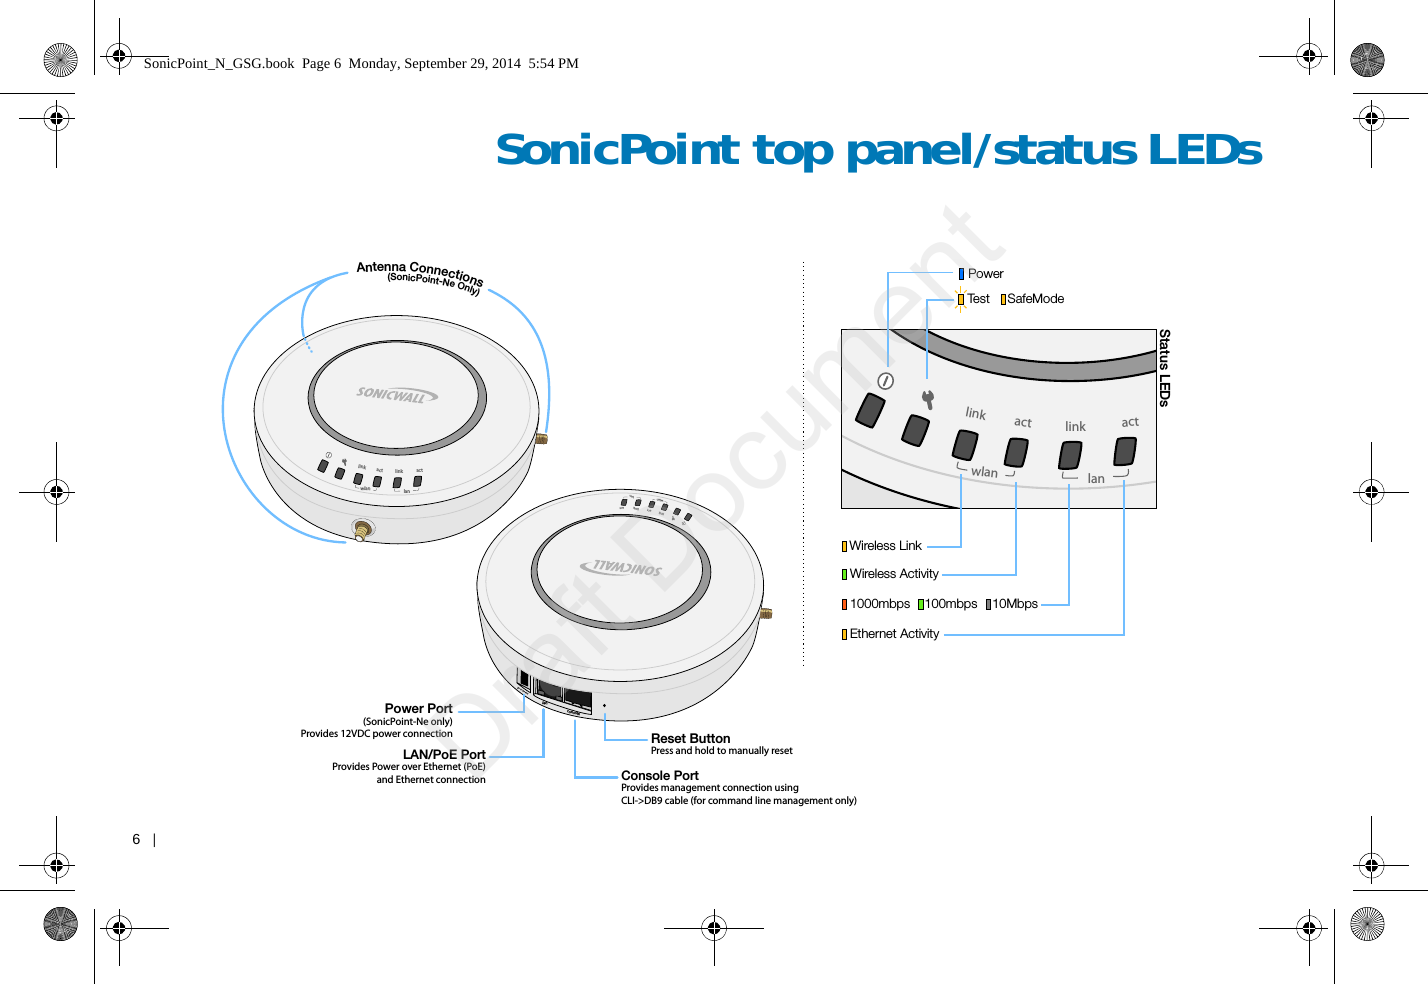 6   |   SonicPoint top panel/status LEDslinkwlanlanactlinkact  Antenna Connections              (SonicPoint-Ne Only)linkwlanlanactlinkactStatus LEDsPowerTest     SafeModeWireless LinkWireless Activity1000mbps    100mbps  10MbpsEthernet Activitylinkwlanlanactlinkact                        console                        lanPower Port(SonicPoint-Ne only)Provides 12VDC power connectionLAN/PoE PortProvides Power over Ethernet (PoE)and Ethernet connection Console PortProvides management connection usingCLI-&gt;DB9 cable (for command line management only)Reset ButtonPress and hold to manually resetSonicPoint_N_GSG.book  Page 6  Monday, September 29, 2014  5:54 PMDraft Document